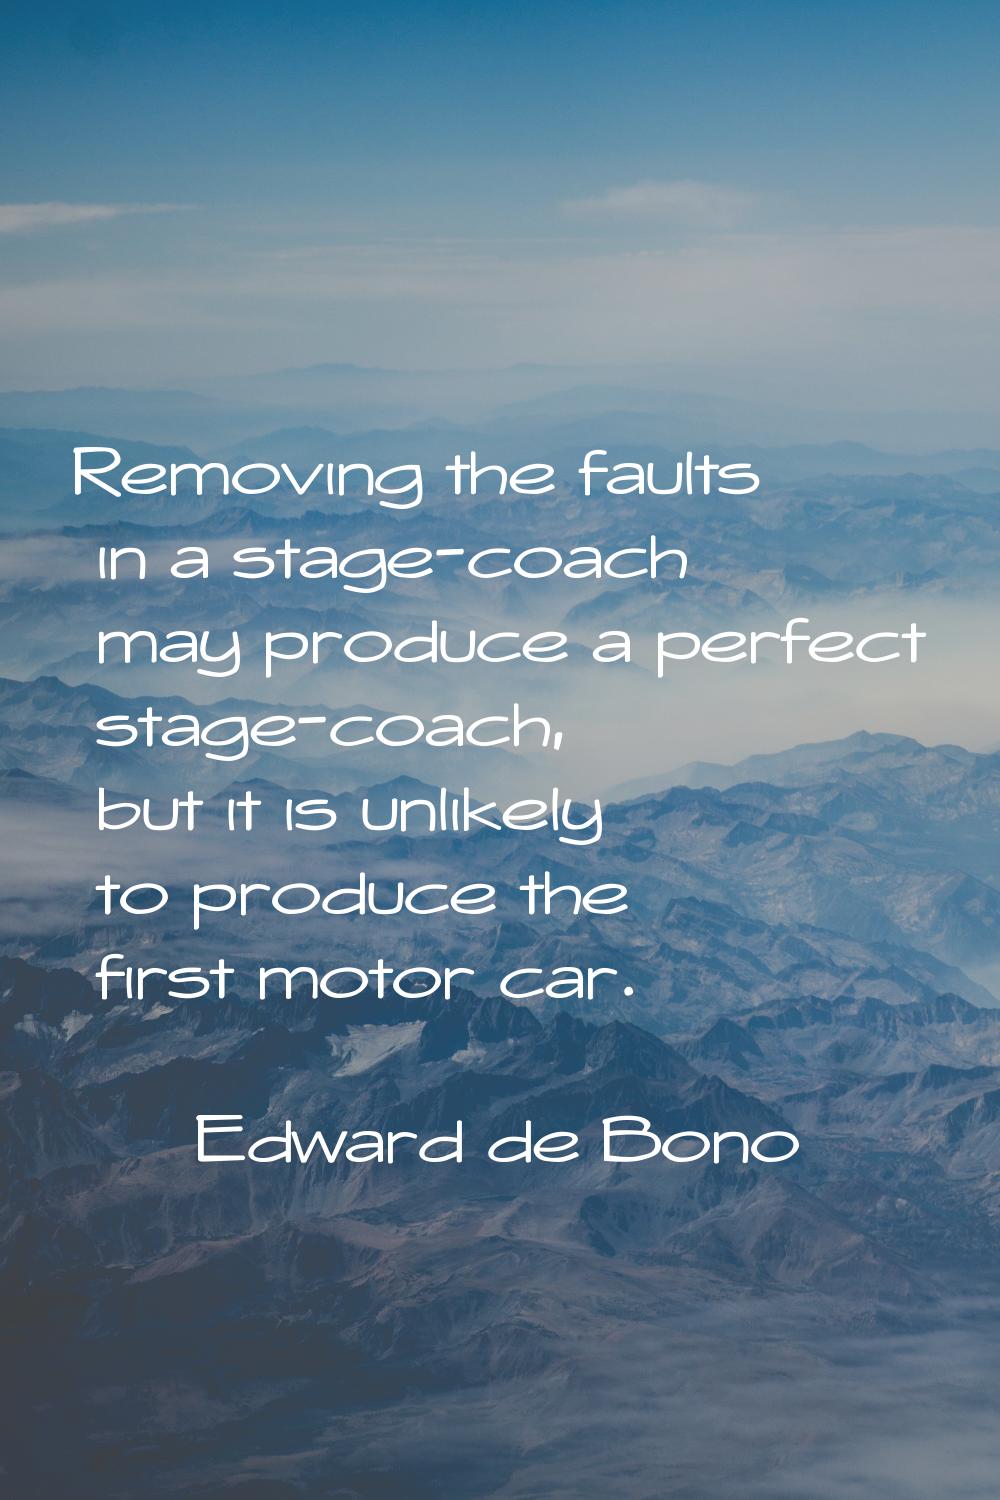 Removing the faults in a stage-coach may produce a perfect stage-coach, but it is unlikely to produ